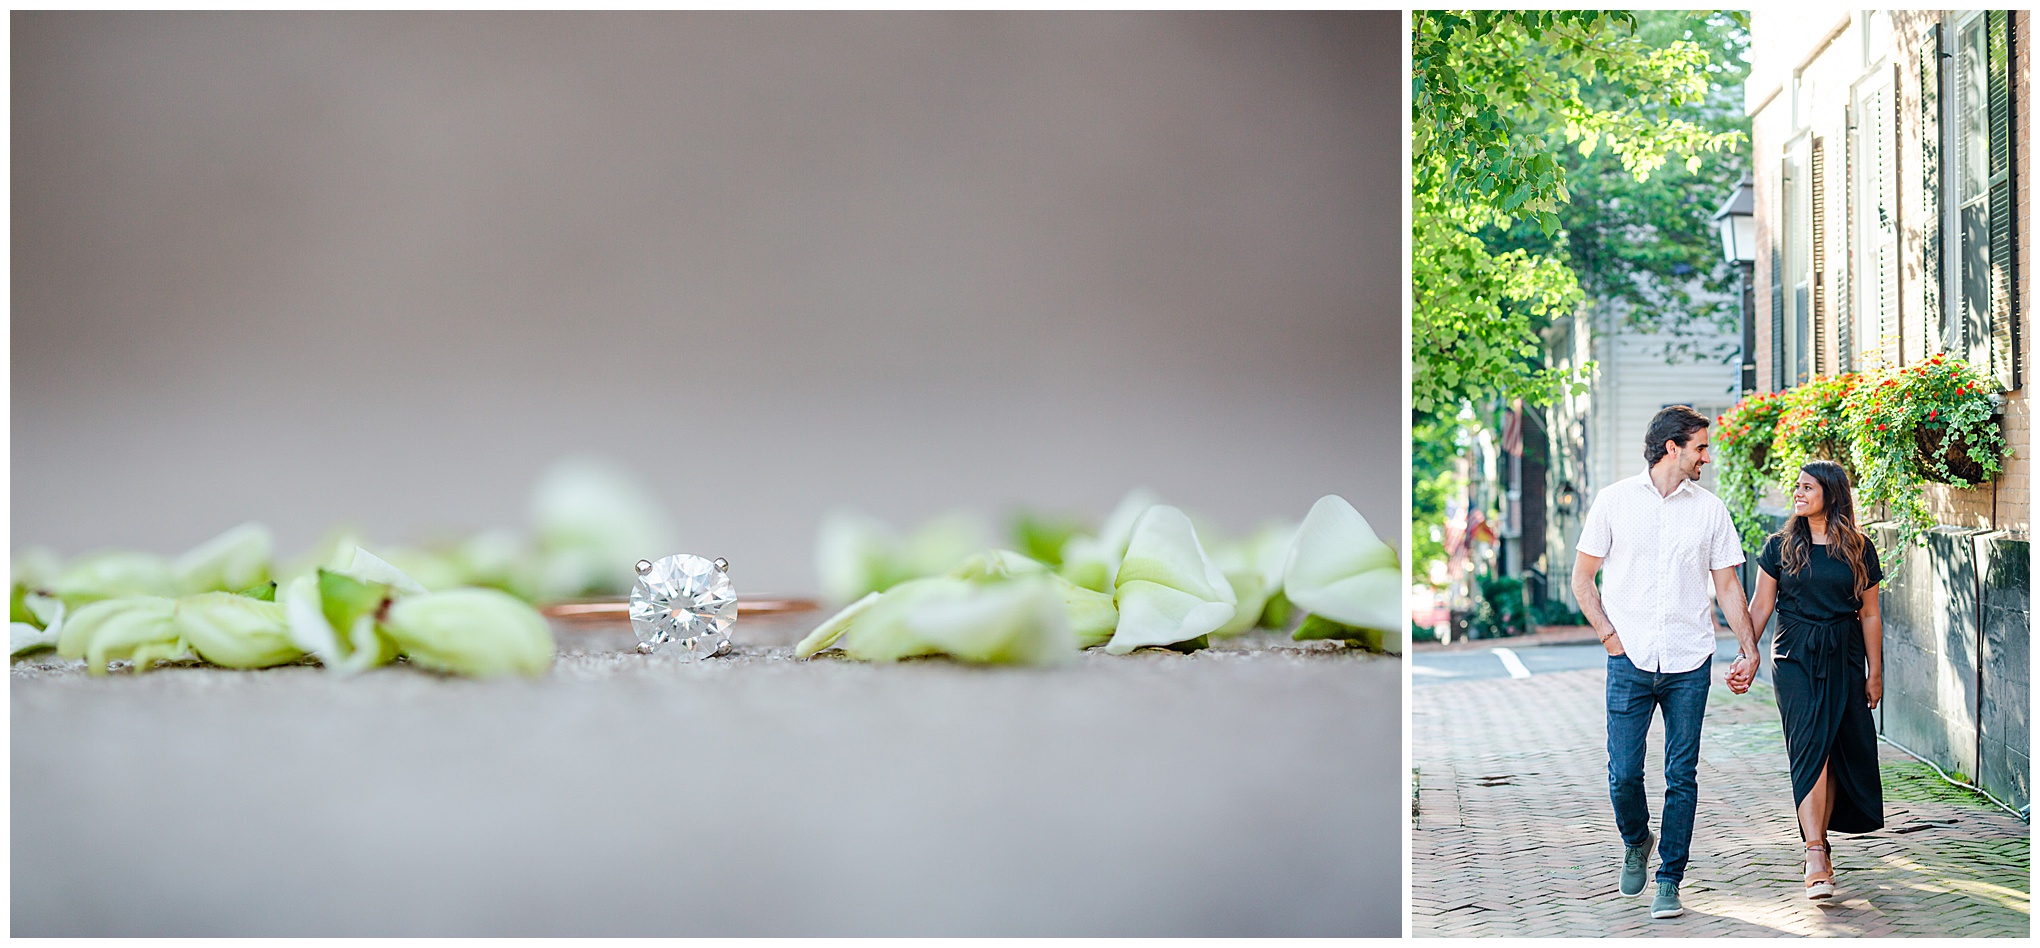 Old Town Alexandria engagement photos, Alexandria engagement photos, Old Town Alexandria photos, Old Town Alexandria, Alexandria engagement photos, Alexandria Virginia, classic engagement photos, historic town engagement photos, engagement photos, Rachel E.H. Photography, rose gold and diamond engagement ring, couple walking